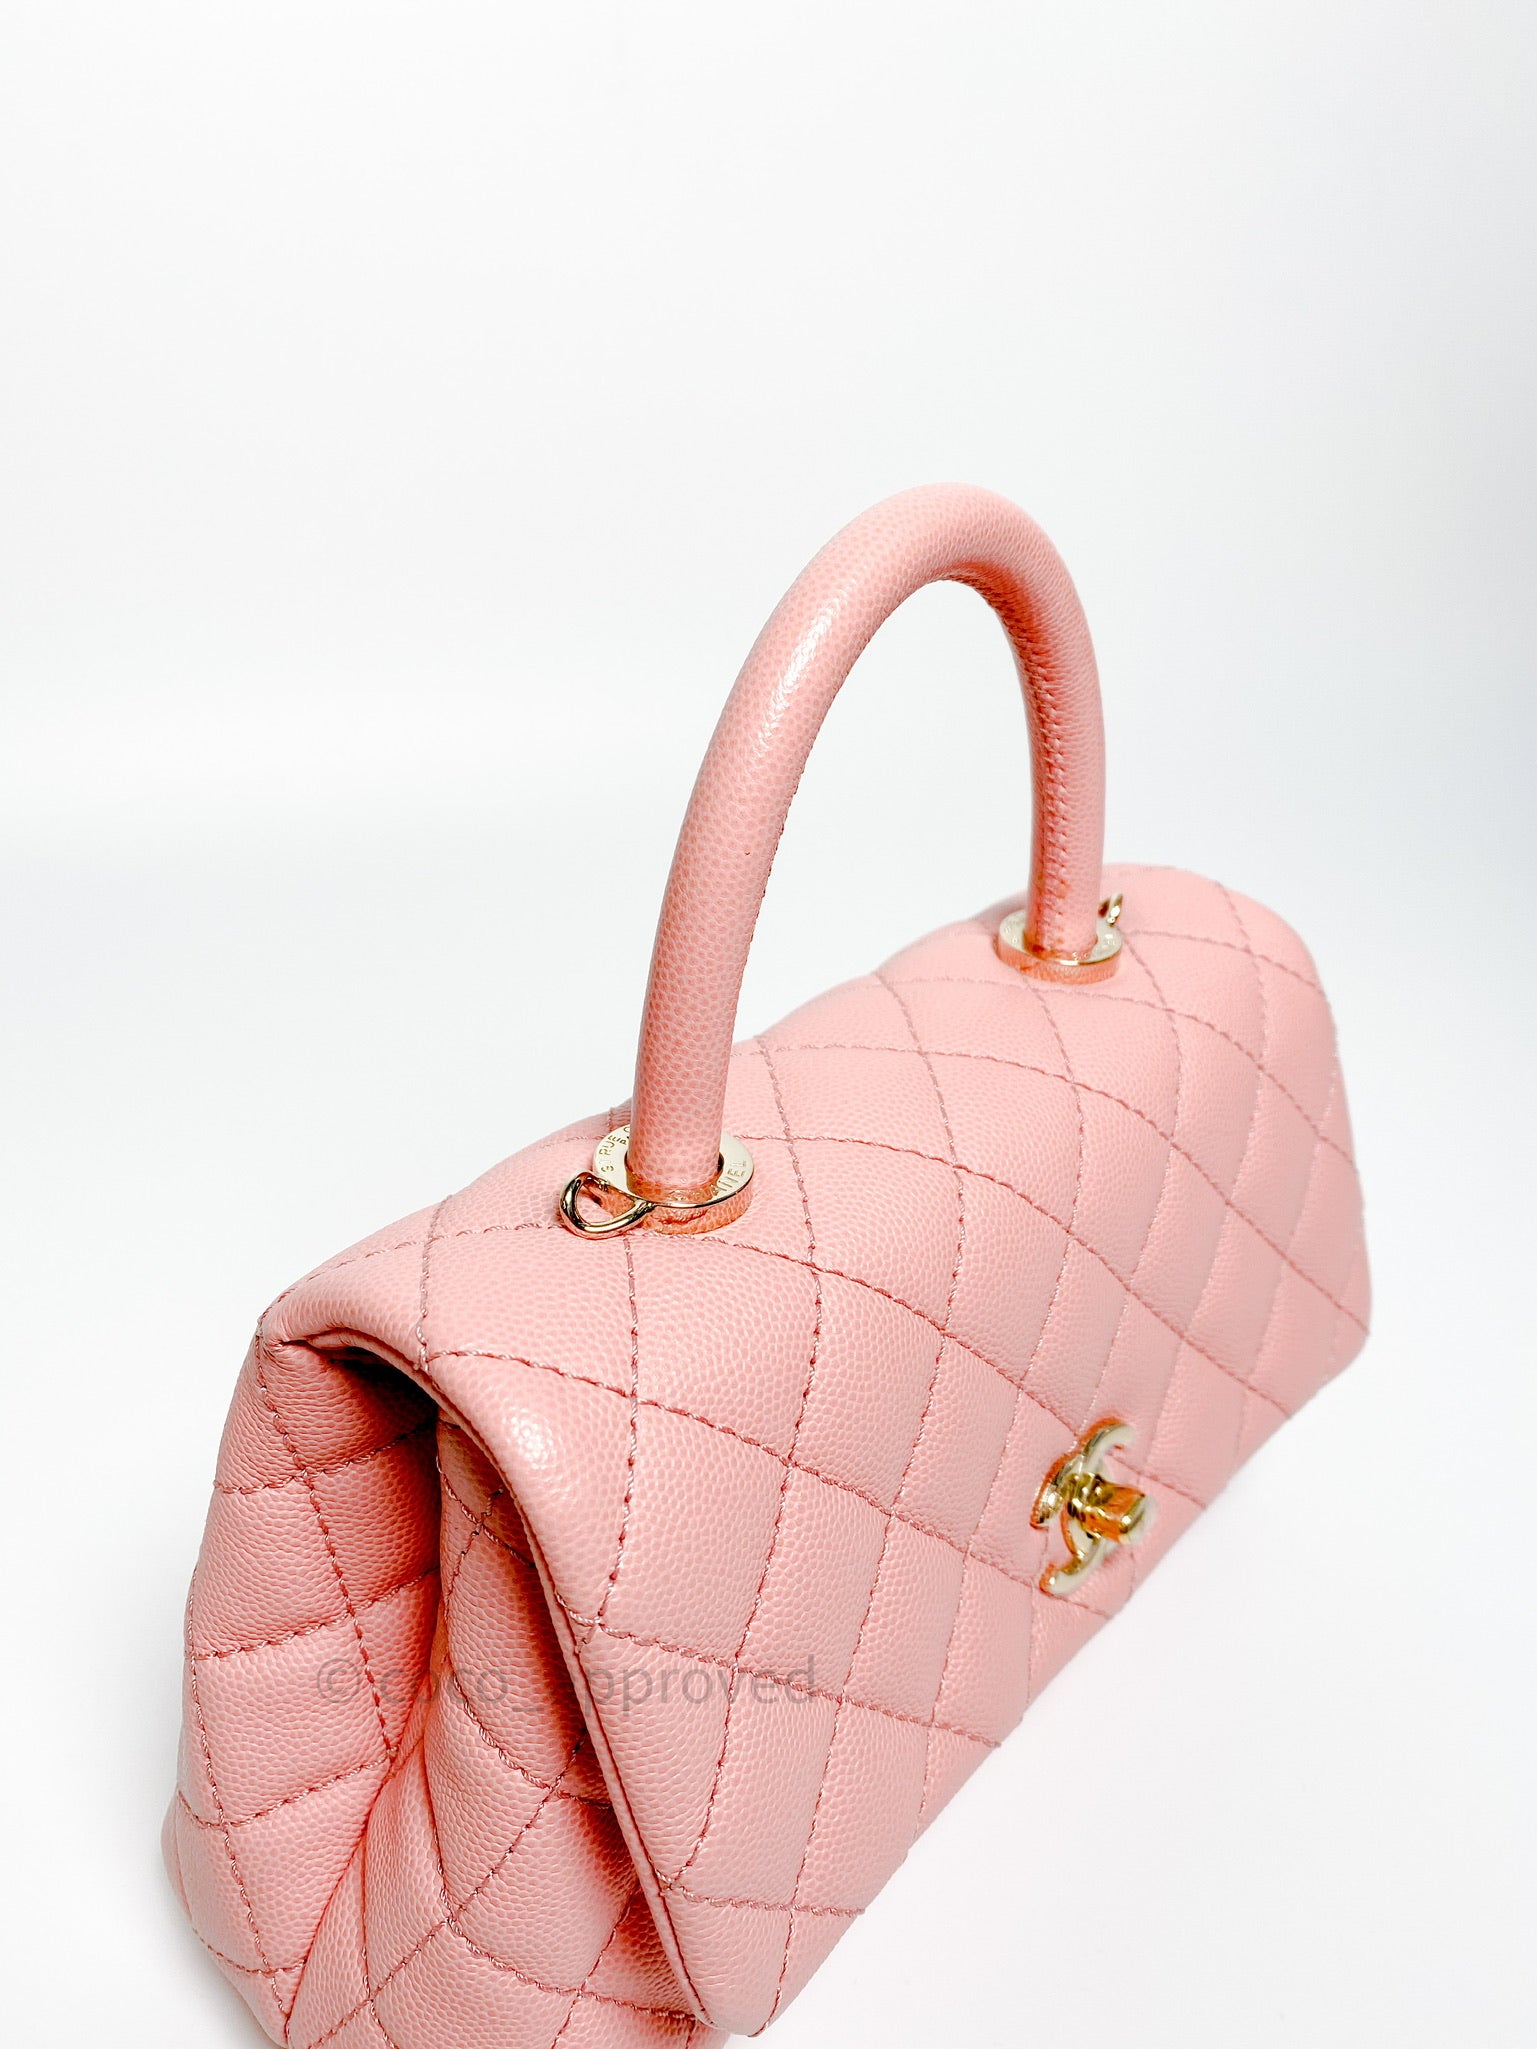 CHANEL Iridescent Caviar Quilted Mini Coco Handle Flap Pink 868625